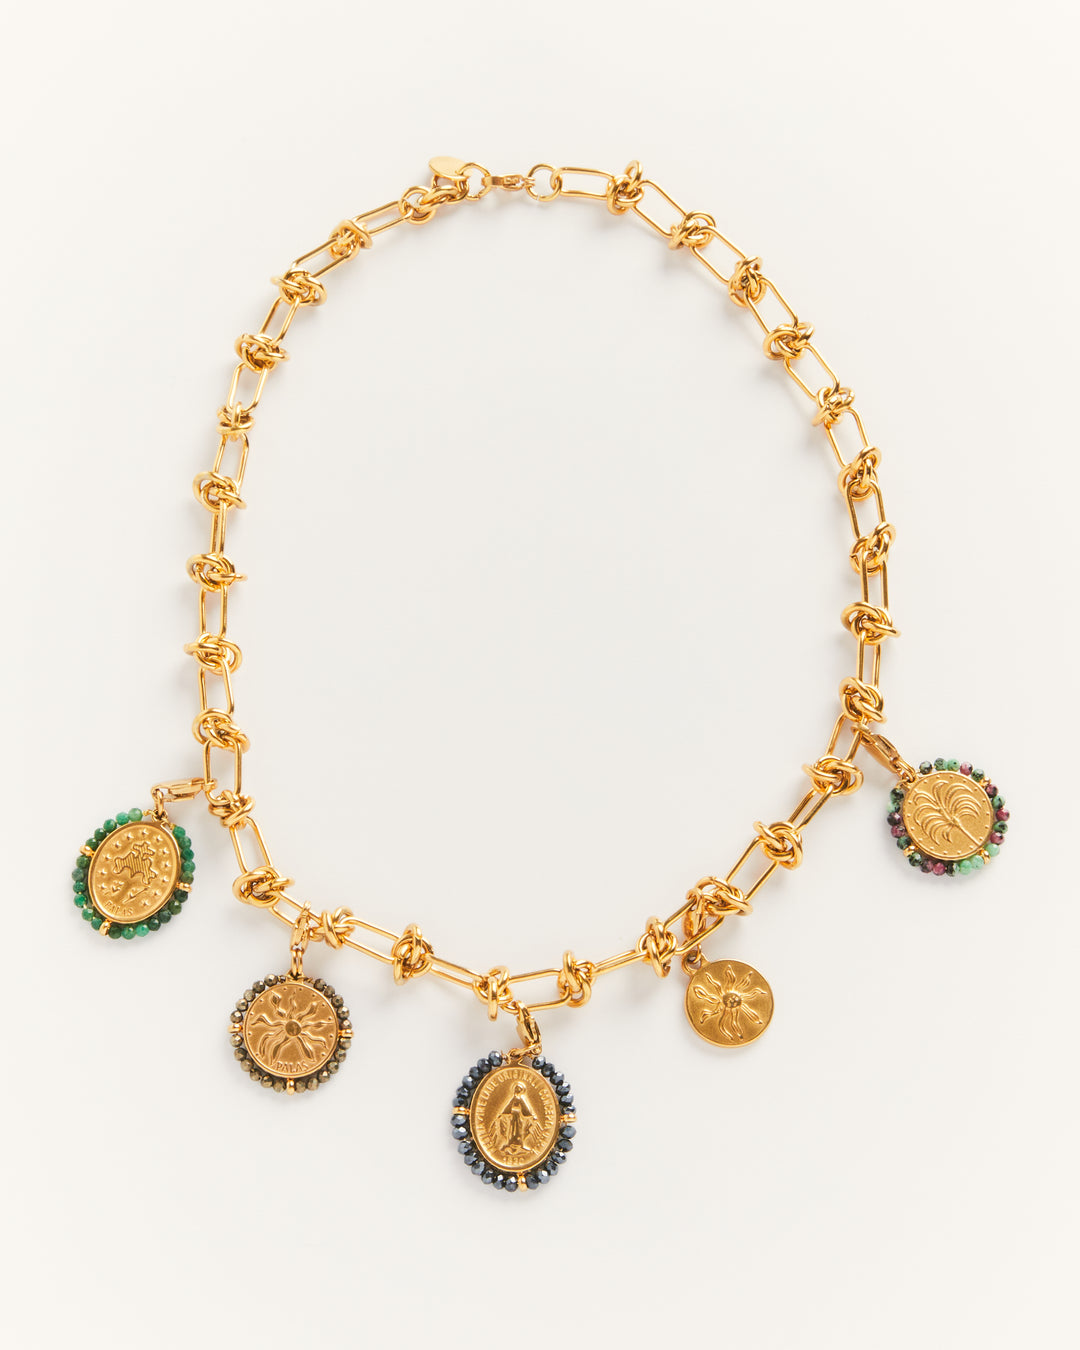 Dazzling Necklace with Colourful Charms - Palas